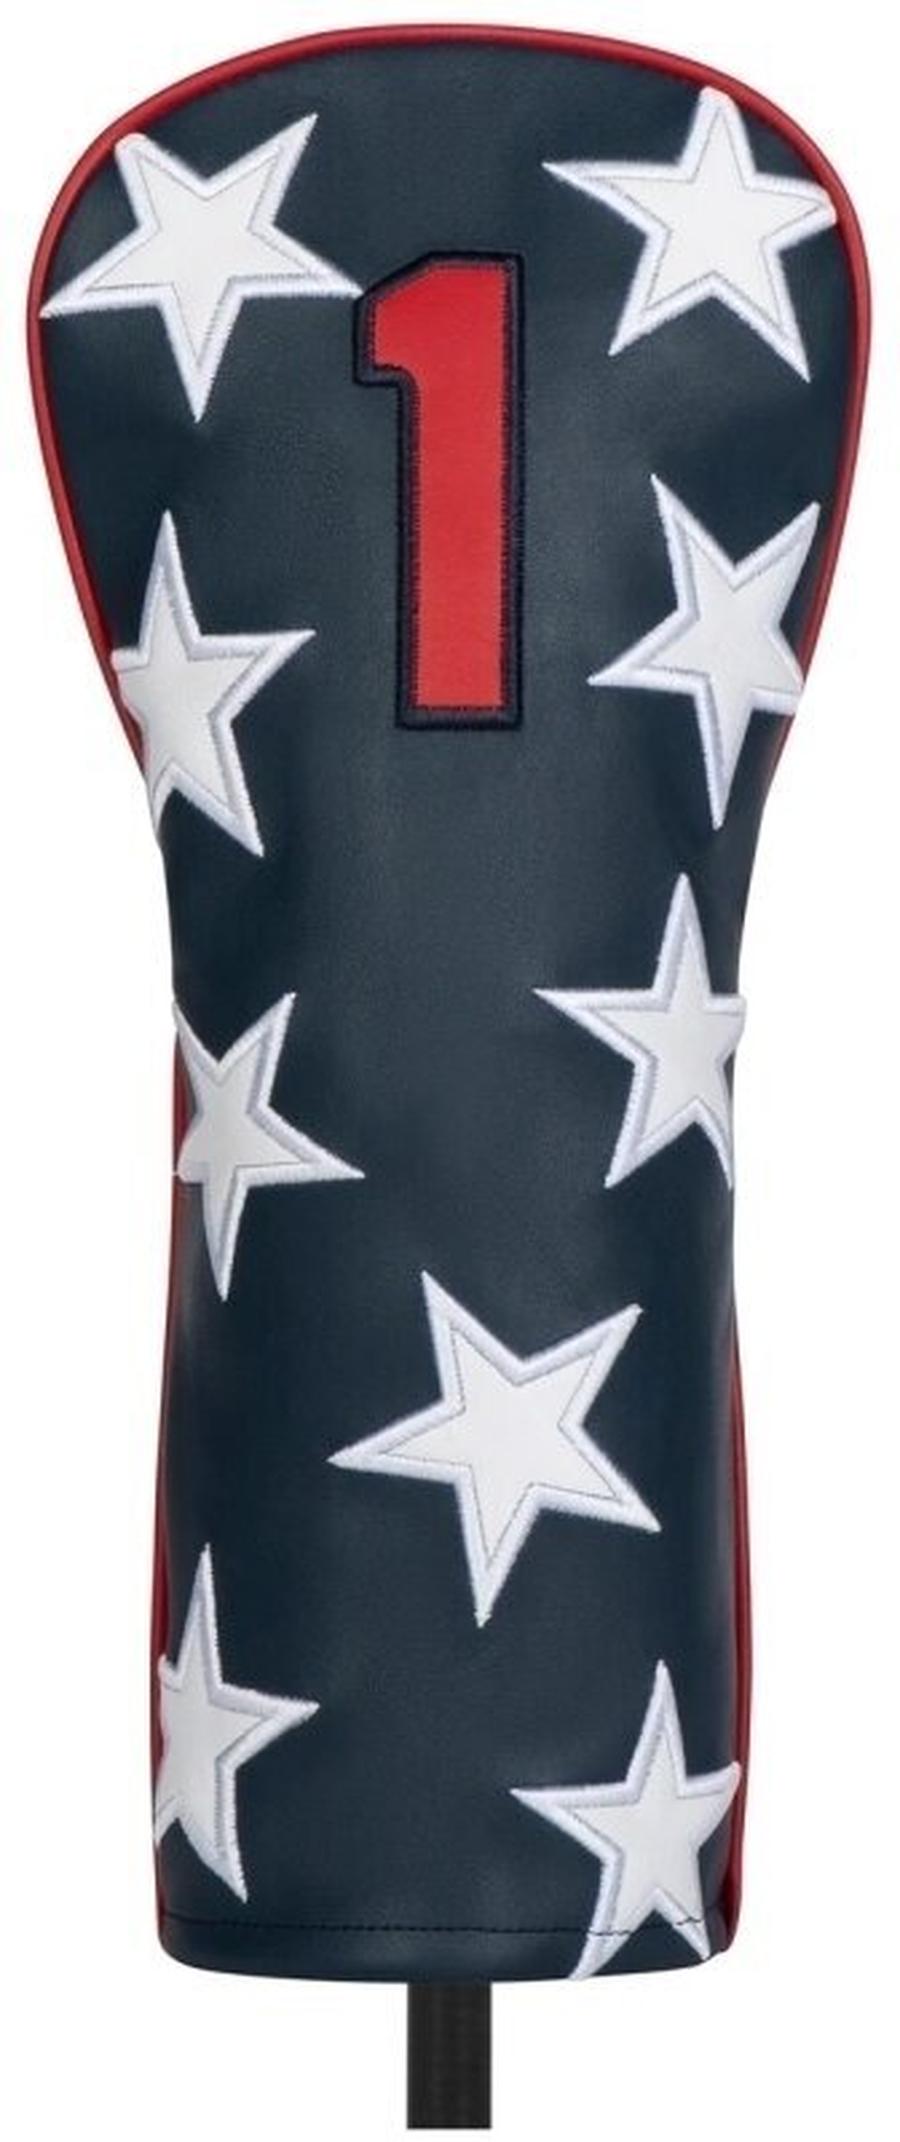 Titleist Stars & Stripes Driver Headcover Red/White/Blue